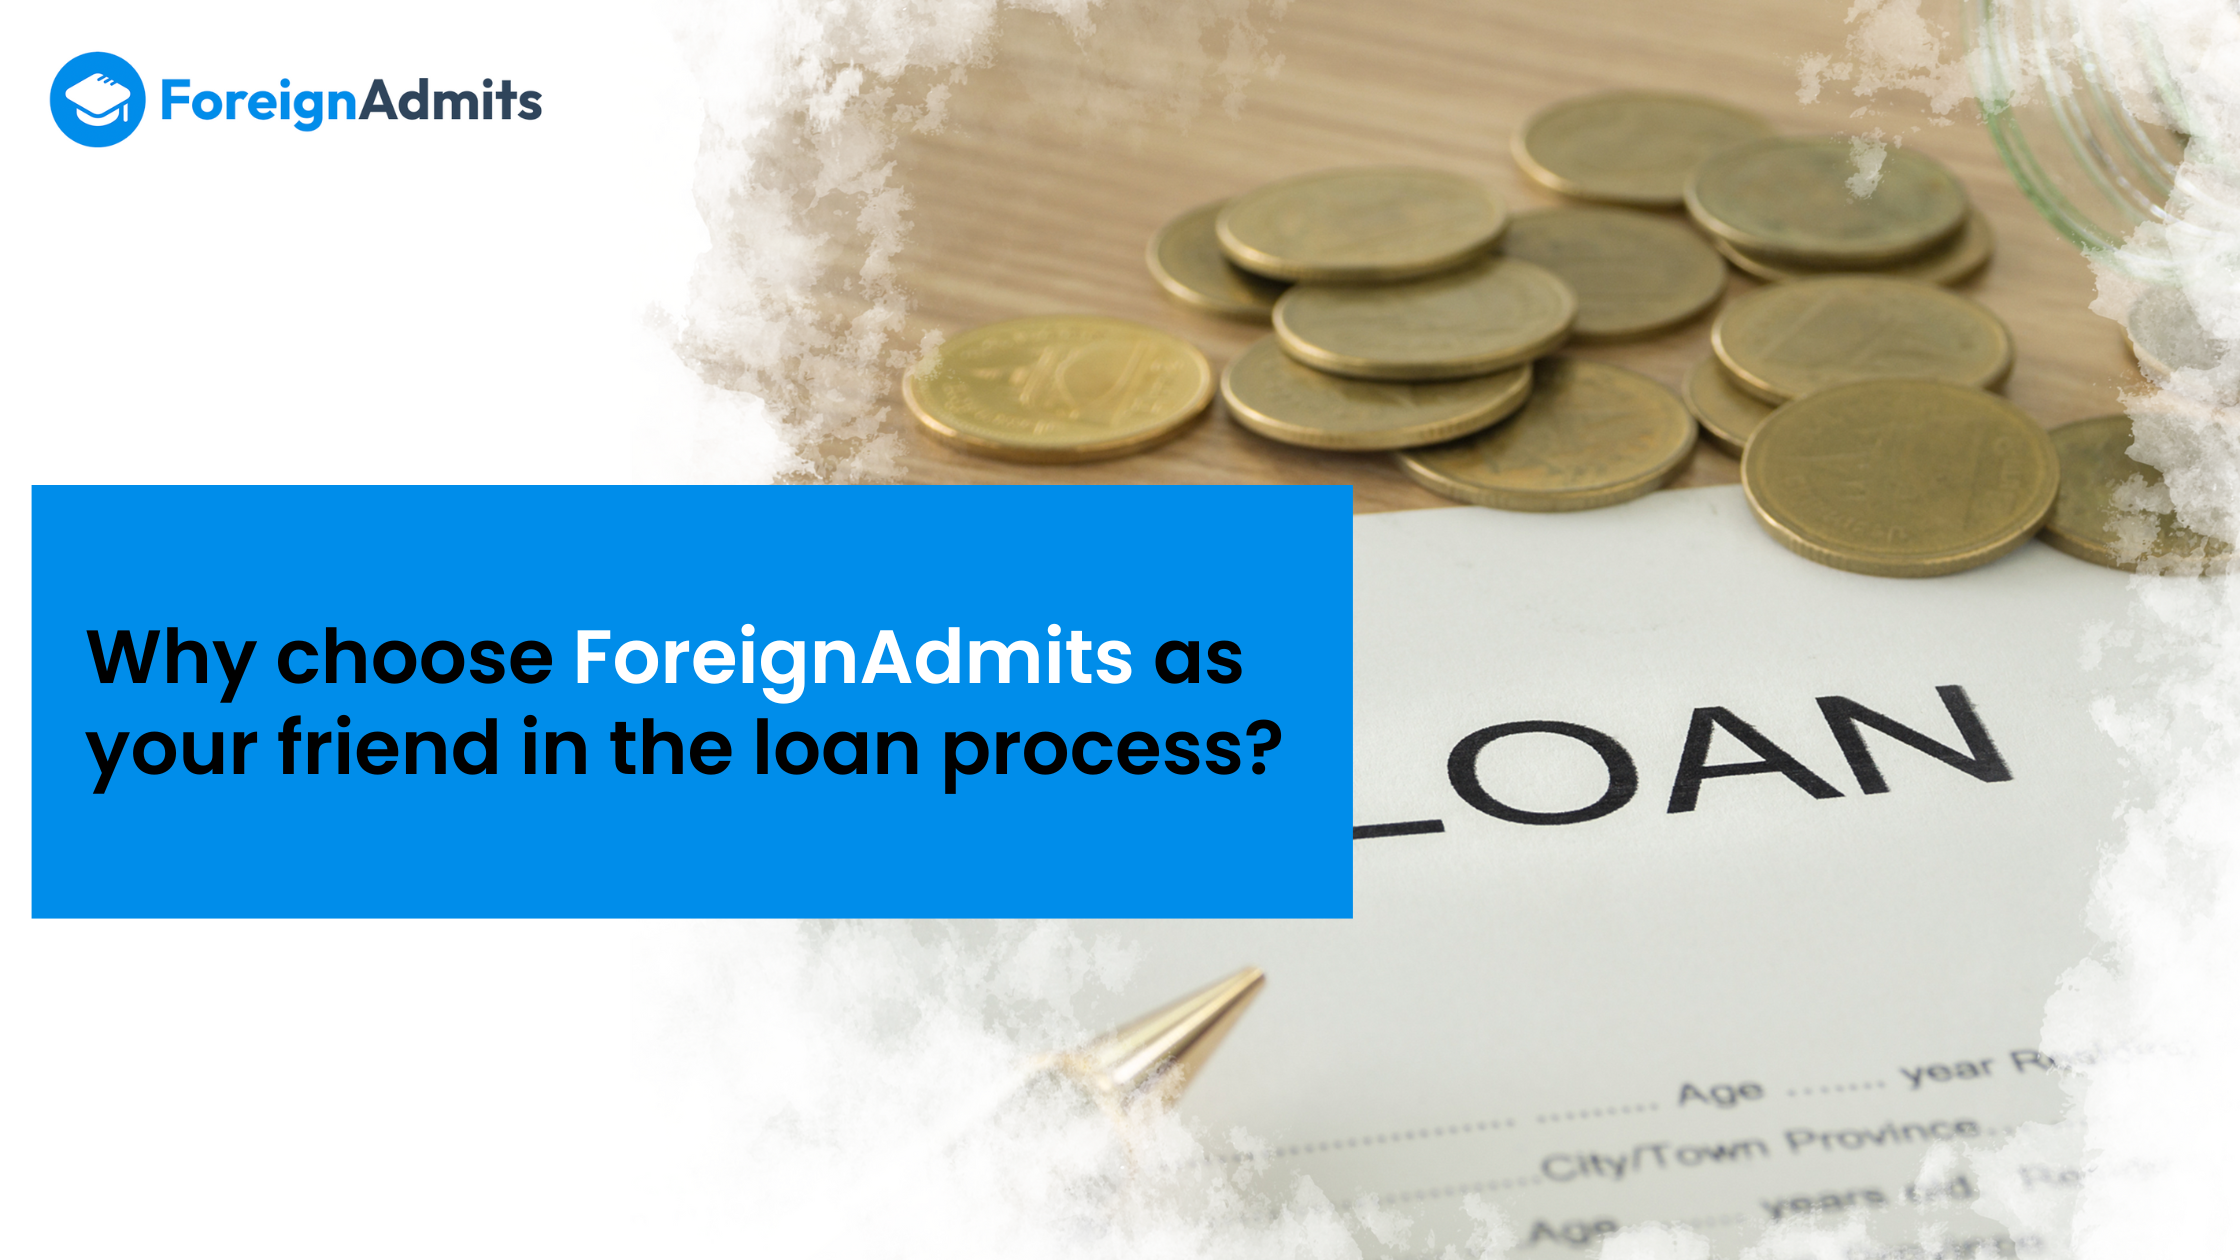 Why choose ForeignAdmits as Your Friend in the Loan Process?